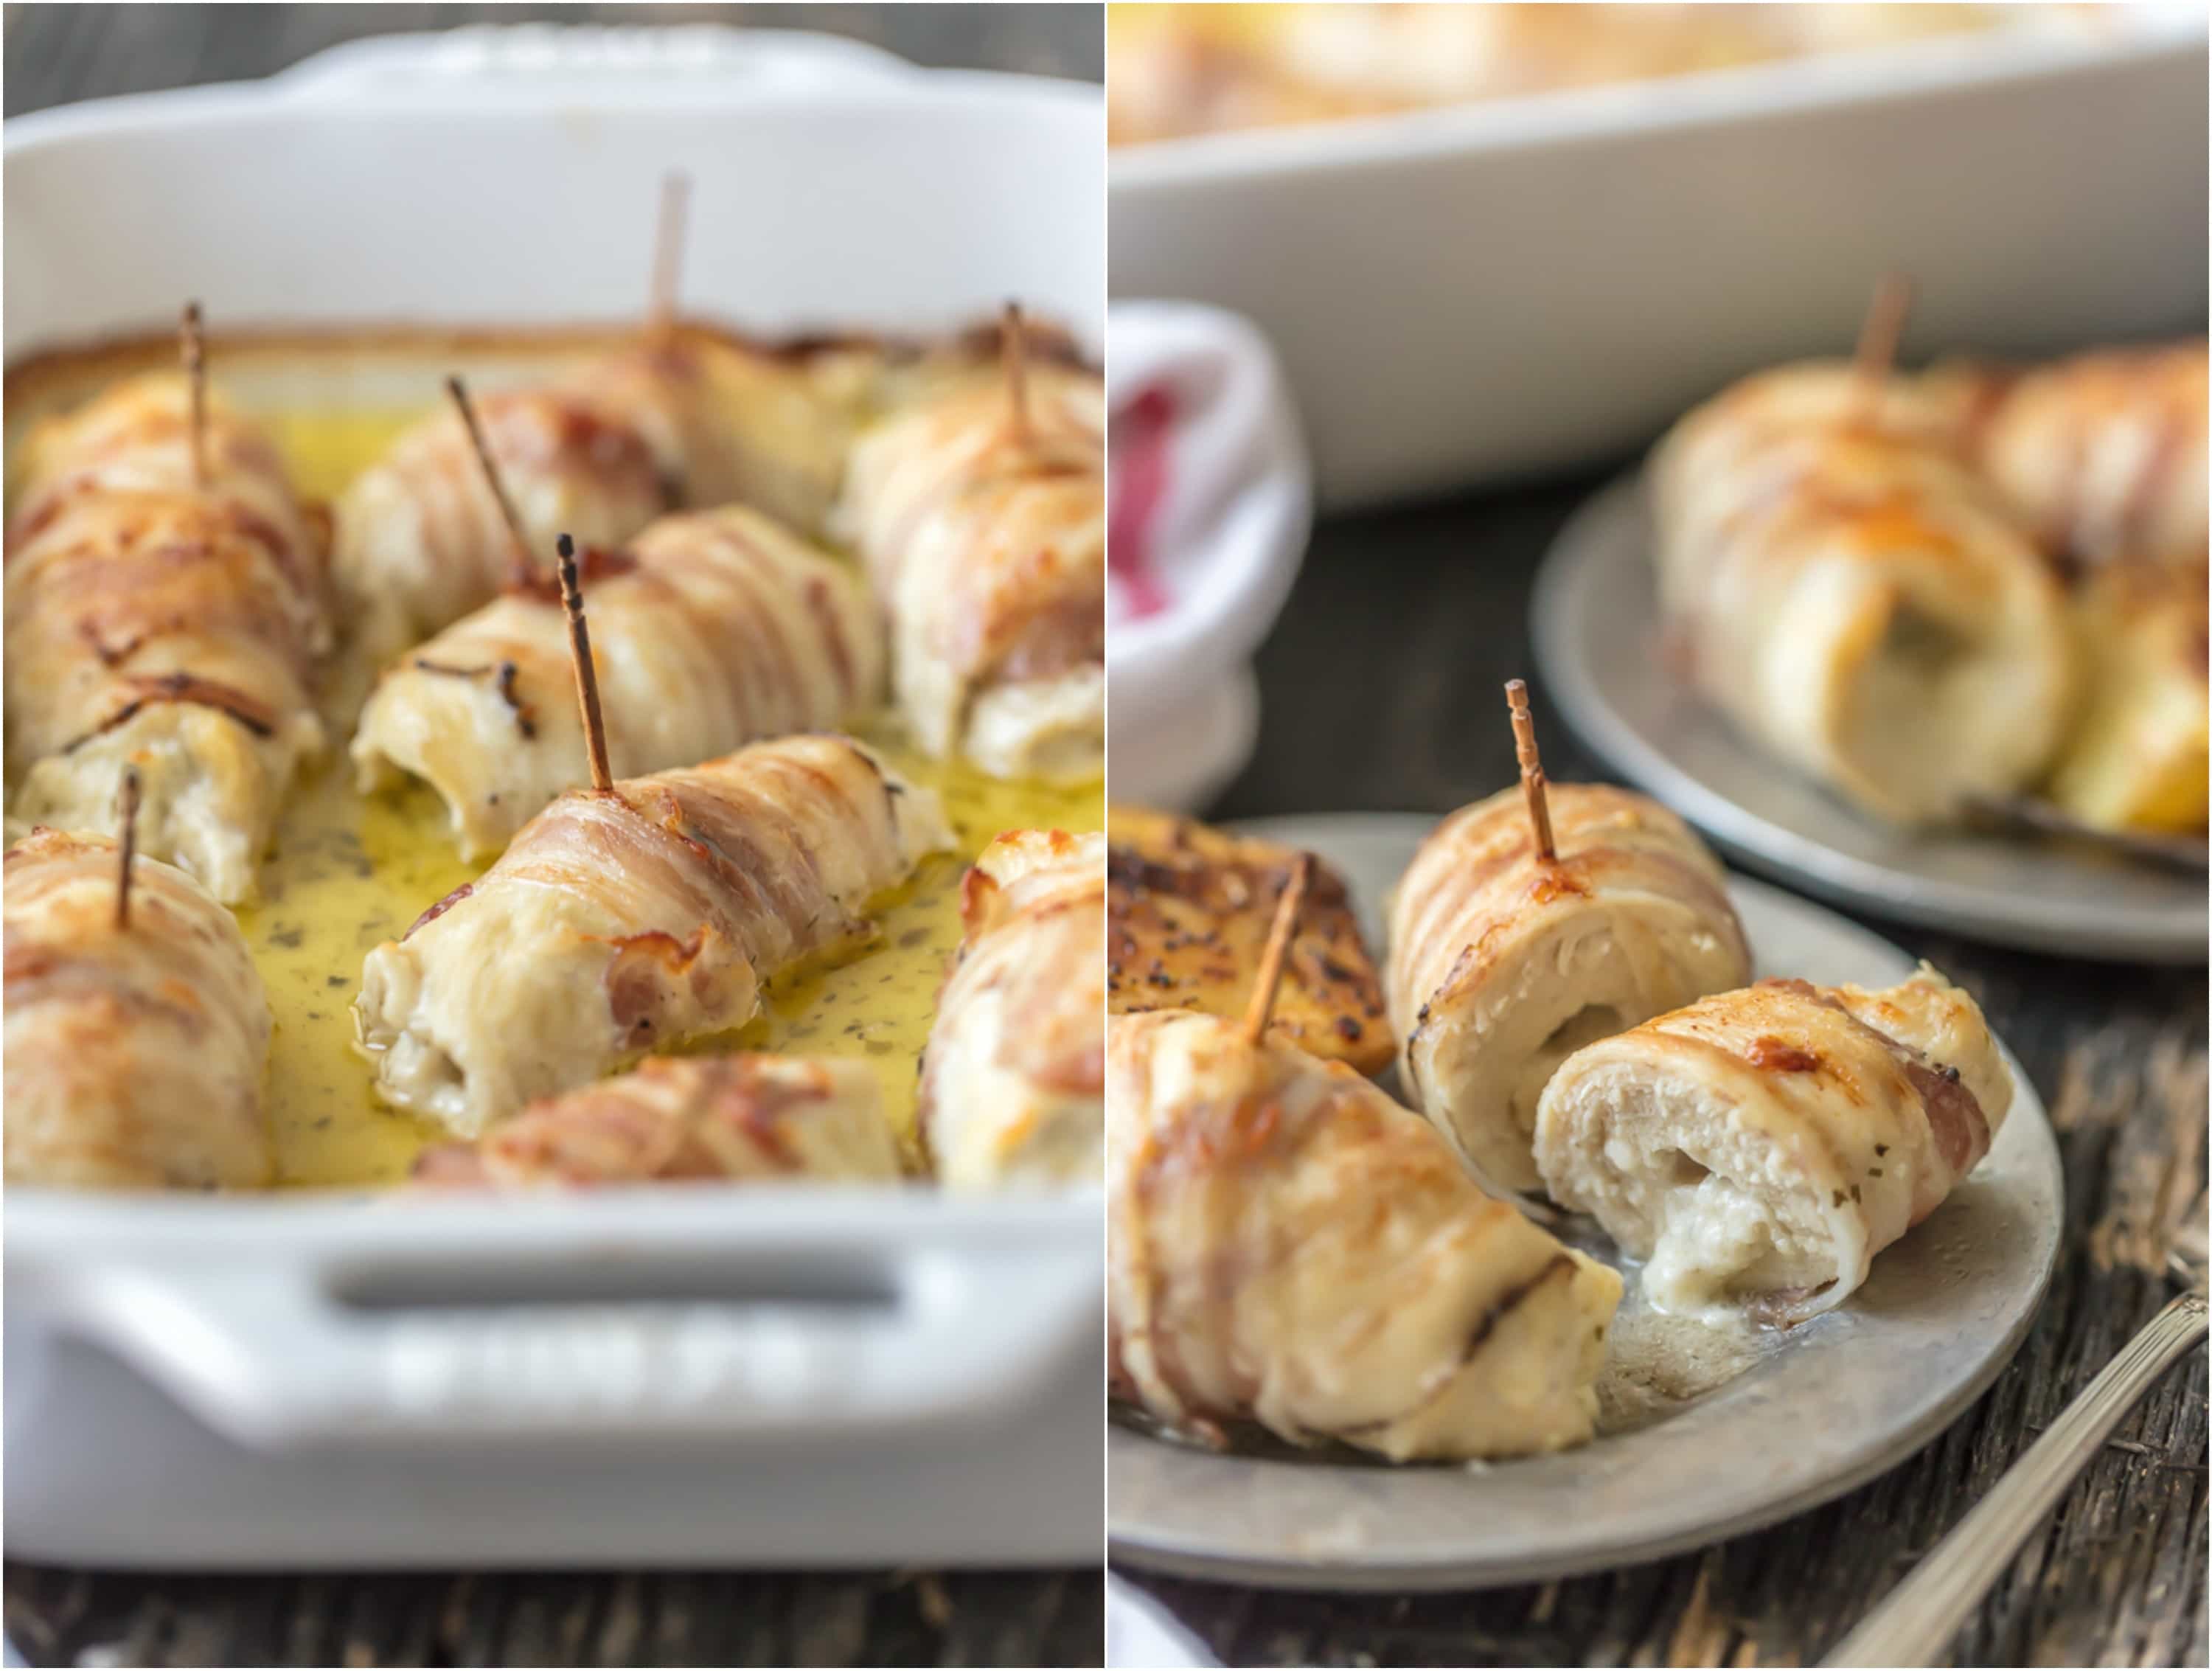 These CHEESY PANCETTA WRAPPED CHICKEN ROLLUPS are so quick and easy and delicious! Chicken stuffed with boursin cheese and wrapped in pancetta makes for the most moist and delicious chicken ever.